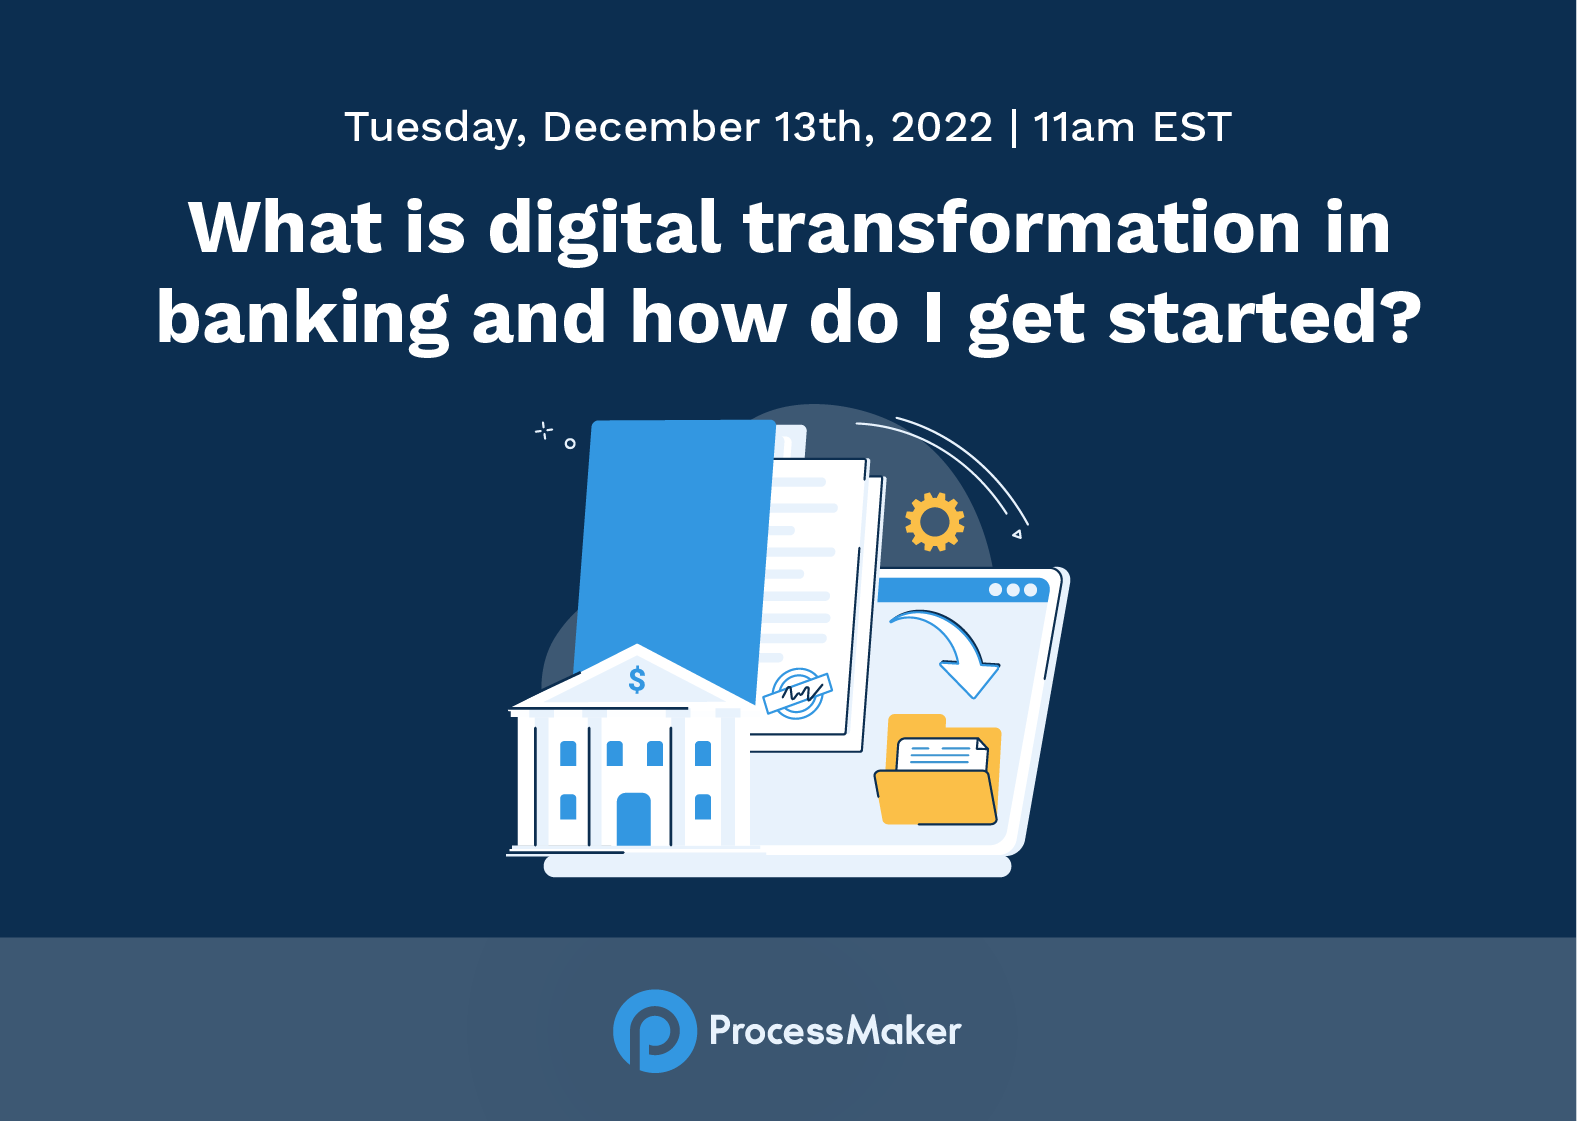 What is digital transformation in banking and how do I get started?